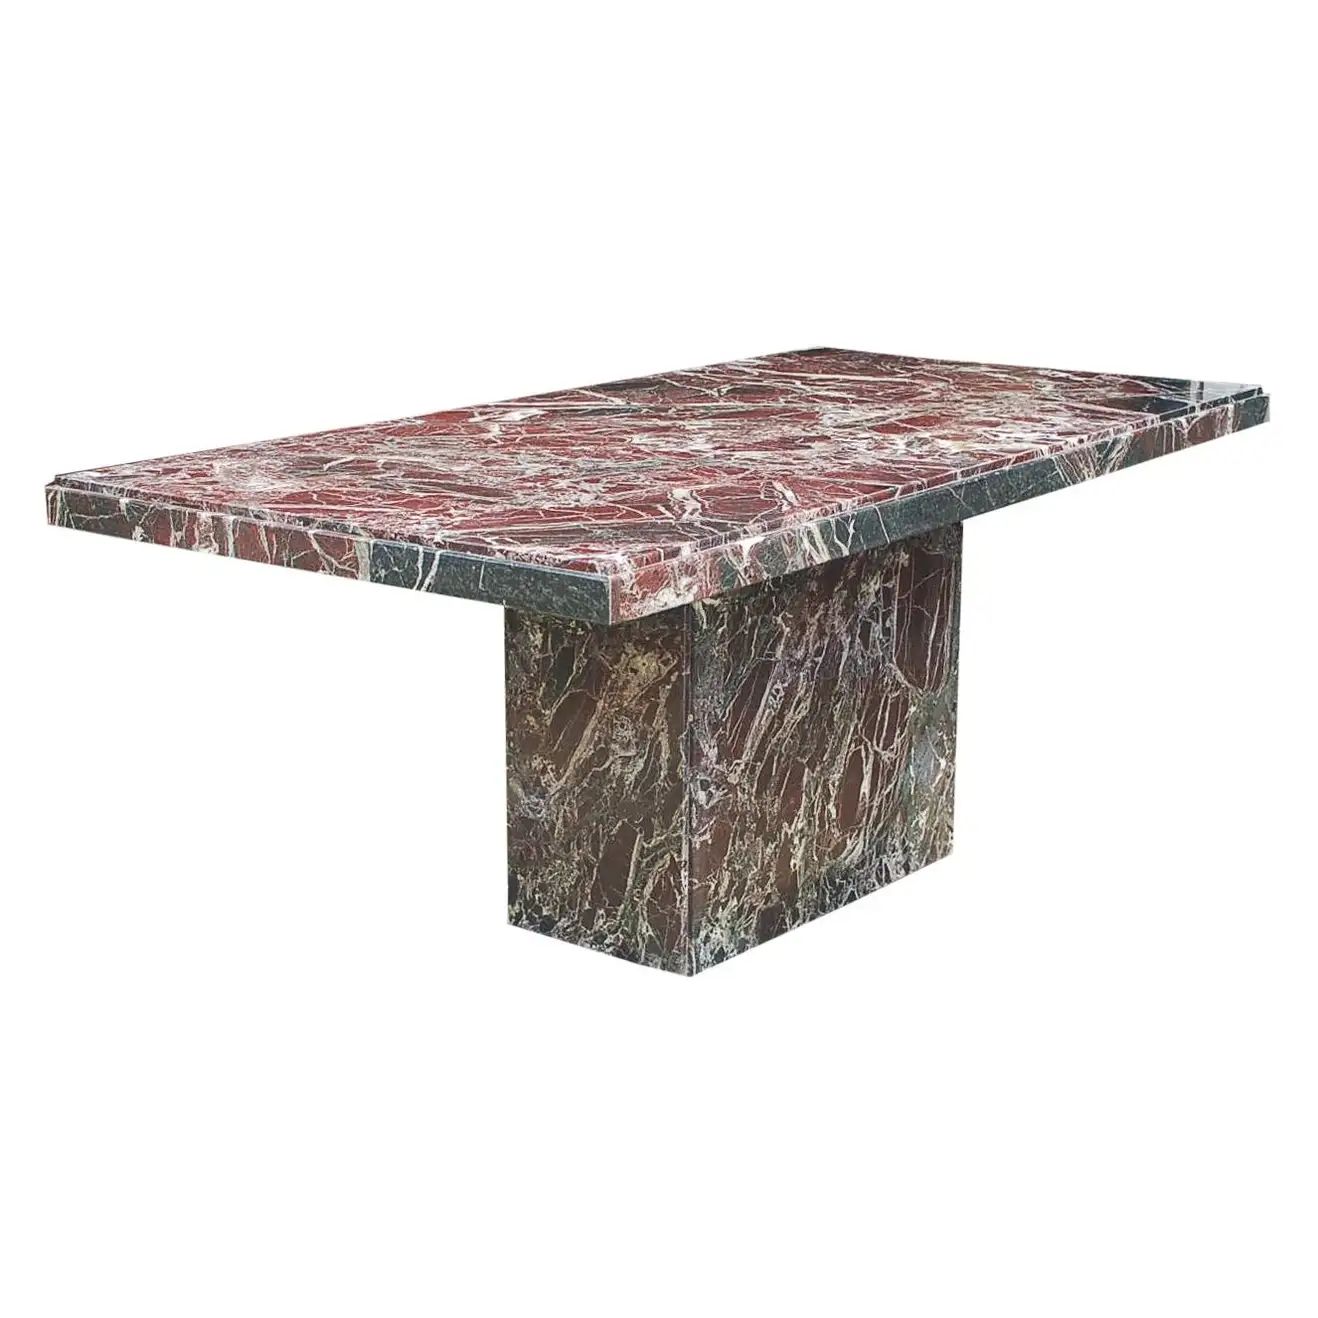 Midcentury Italian Modern Solid Marble Slab Dining Table in Black and Burgundy For Sale at 1stDib... | 1stDibs